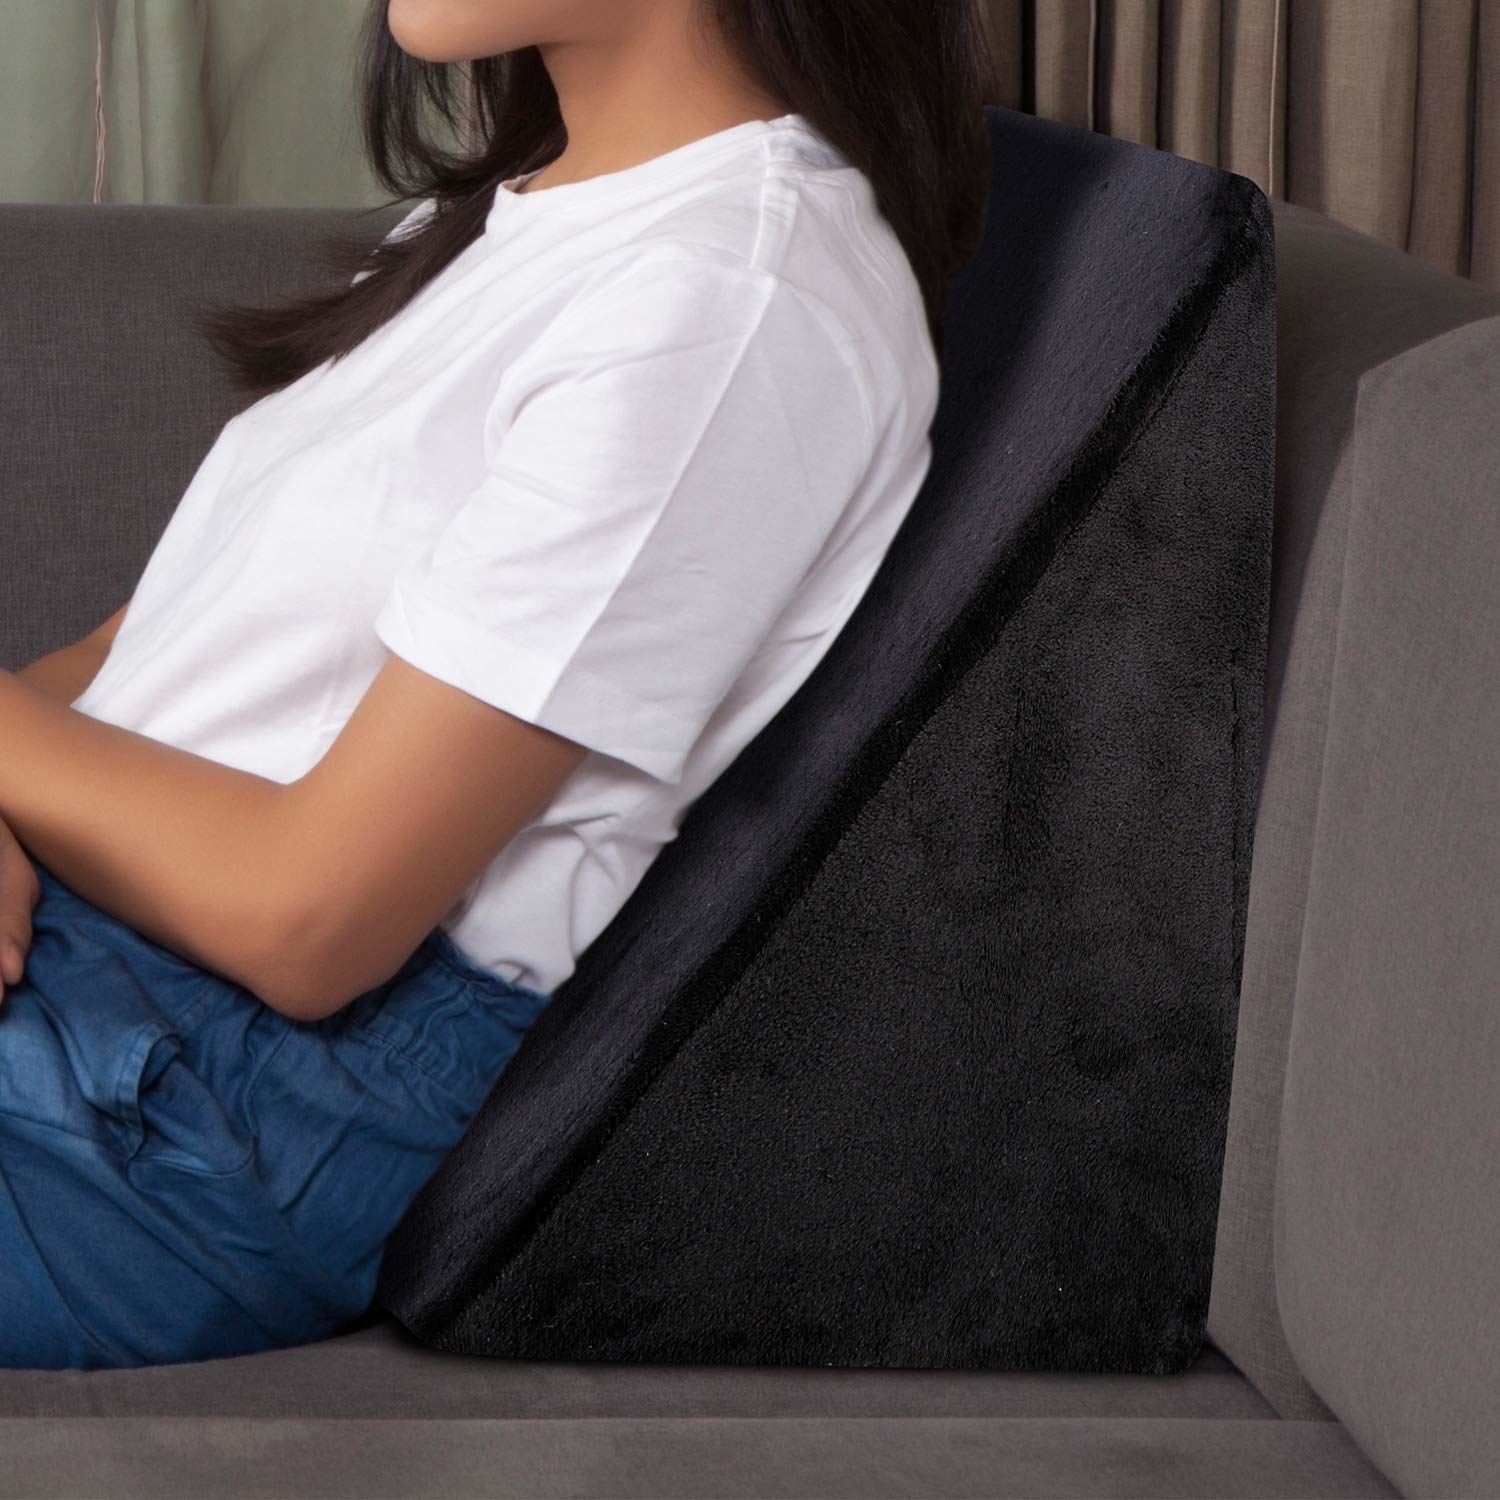 A woman leaning on a memory foam wedge pillow 